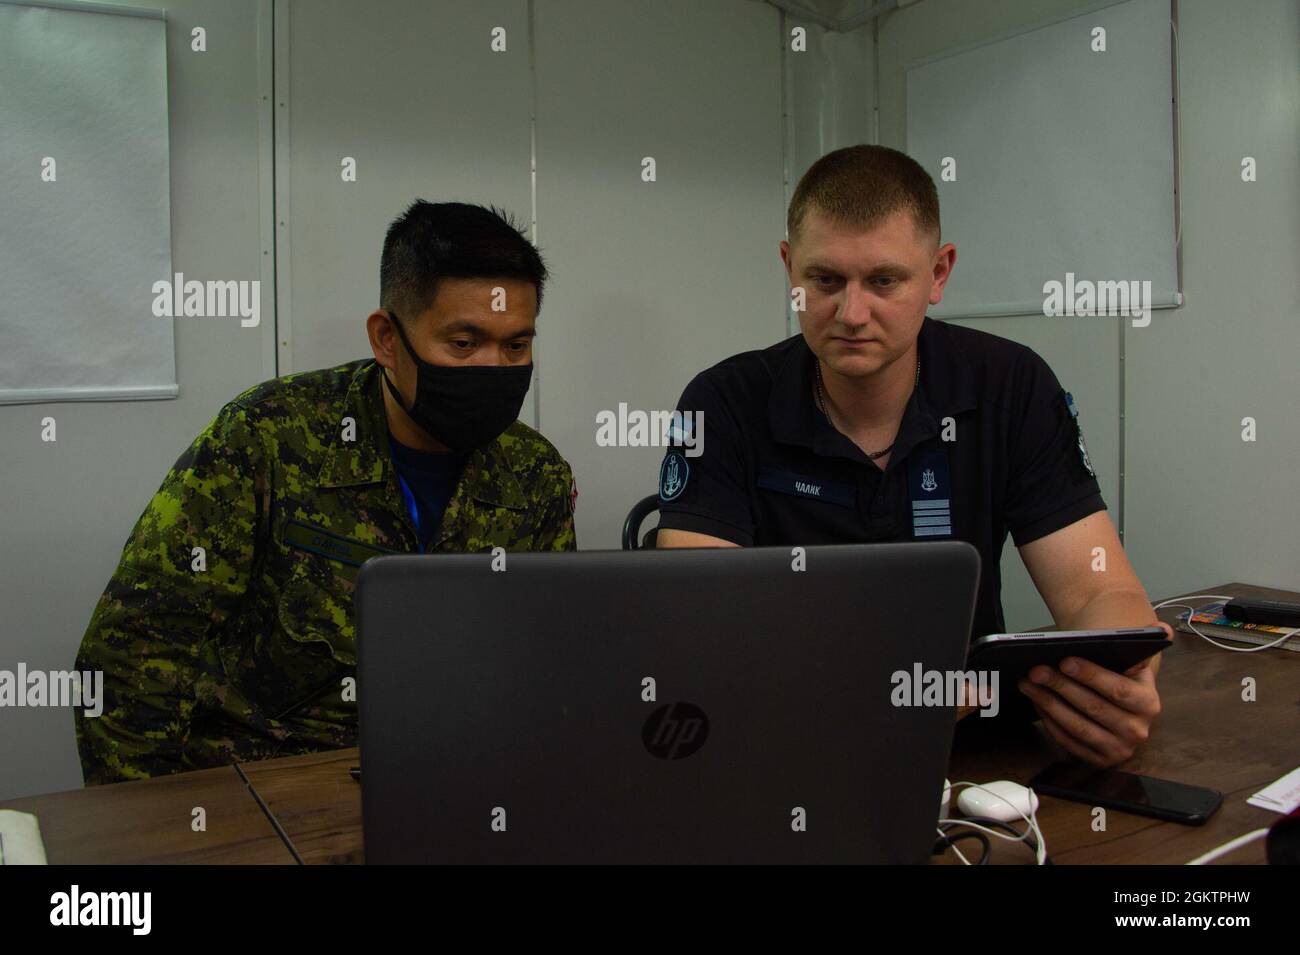 210701-F-D0094-0007 ODESA, Ukraine (July 1, 2021) Senior Public Affairs Officers for Exercise SEA BREEZE 21, Major Christopher Daniel from the Canadian Armed Forces (CAF) and Commander Chalyk Oleh from the Ukrainian Navy, conduct media monitoring and analysis in Odesa, Ukraine on July 1, 2021. Co-hosted by the United States Navy Stock Photo